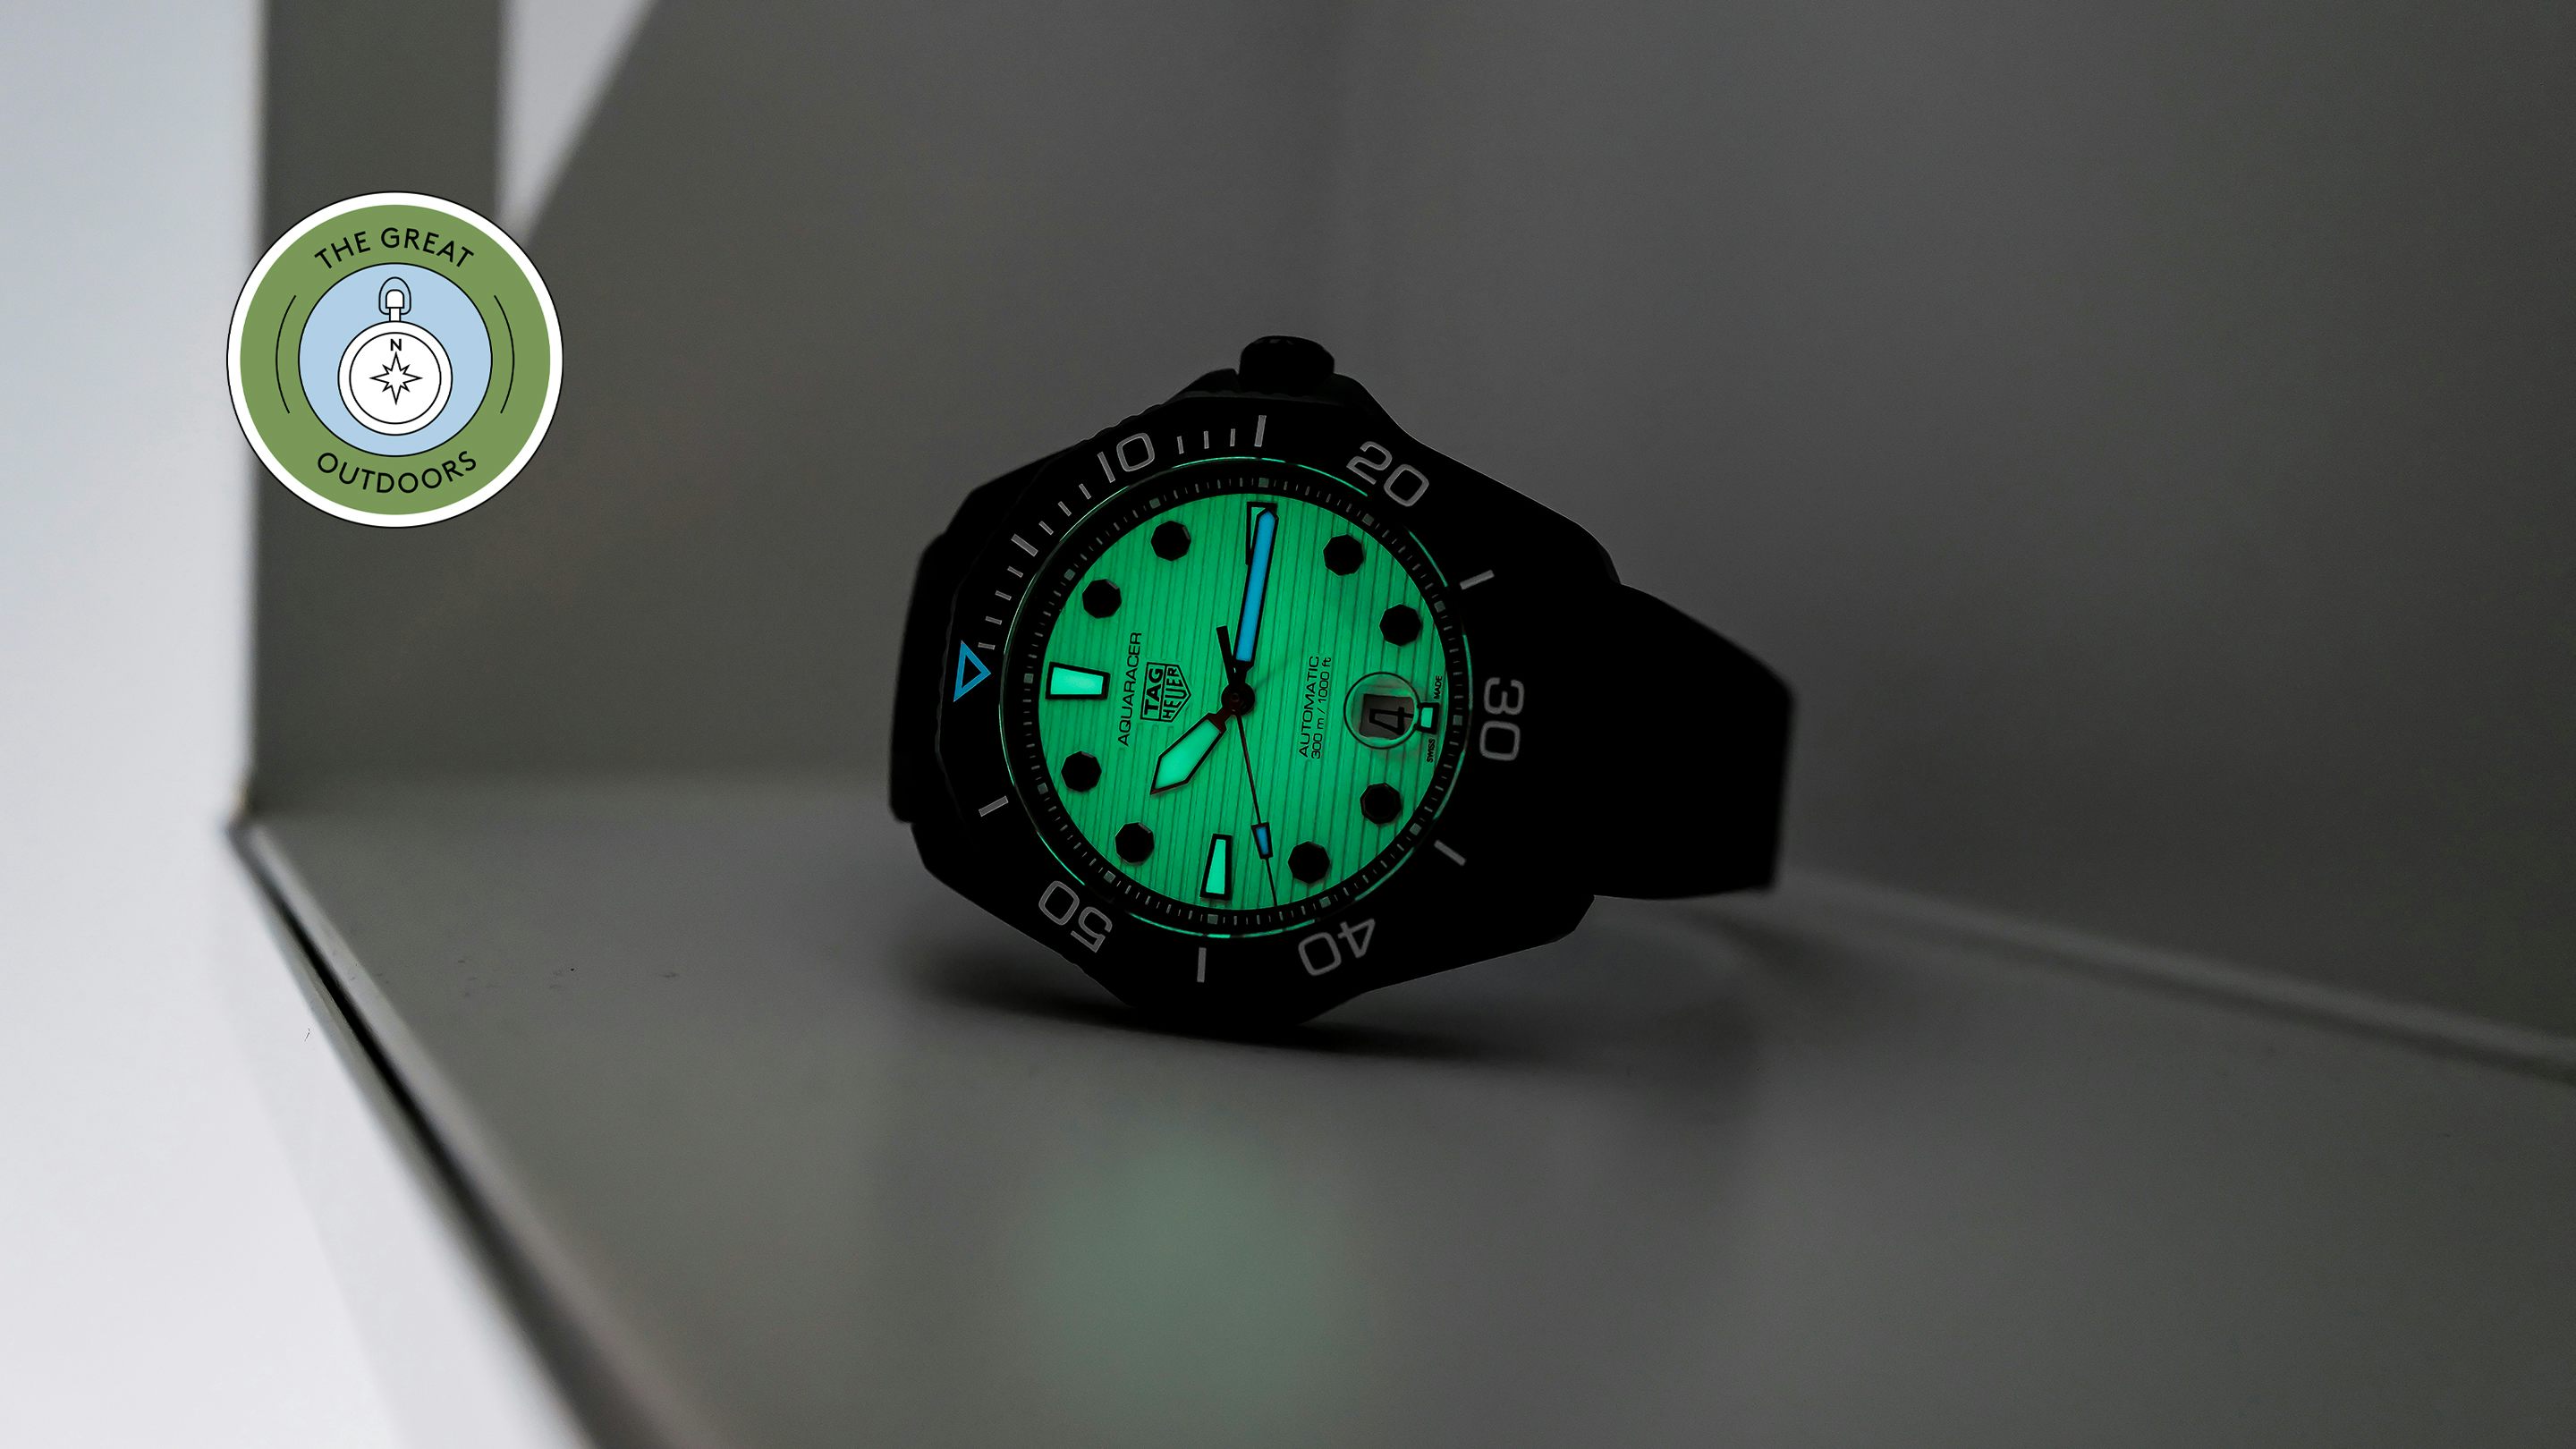 The Watch That Really Glows In The Dark